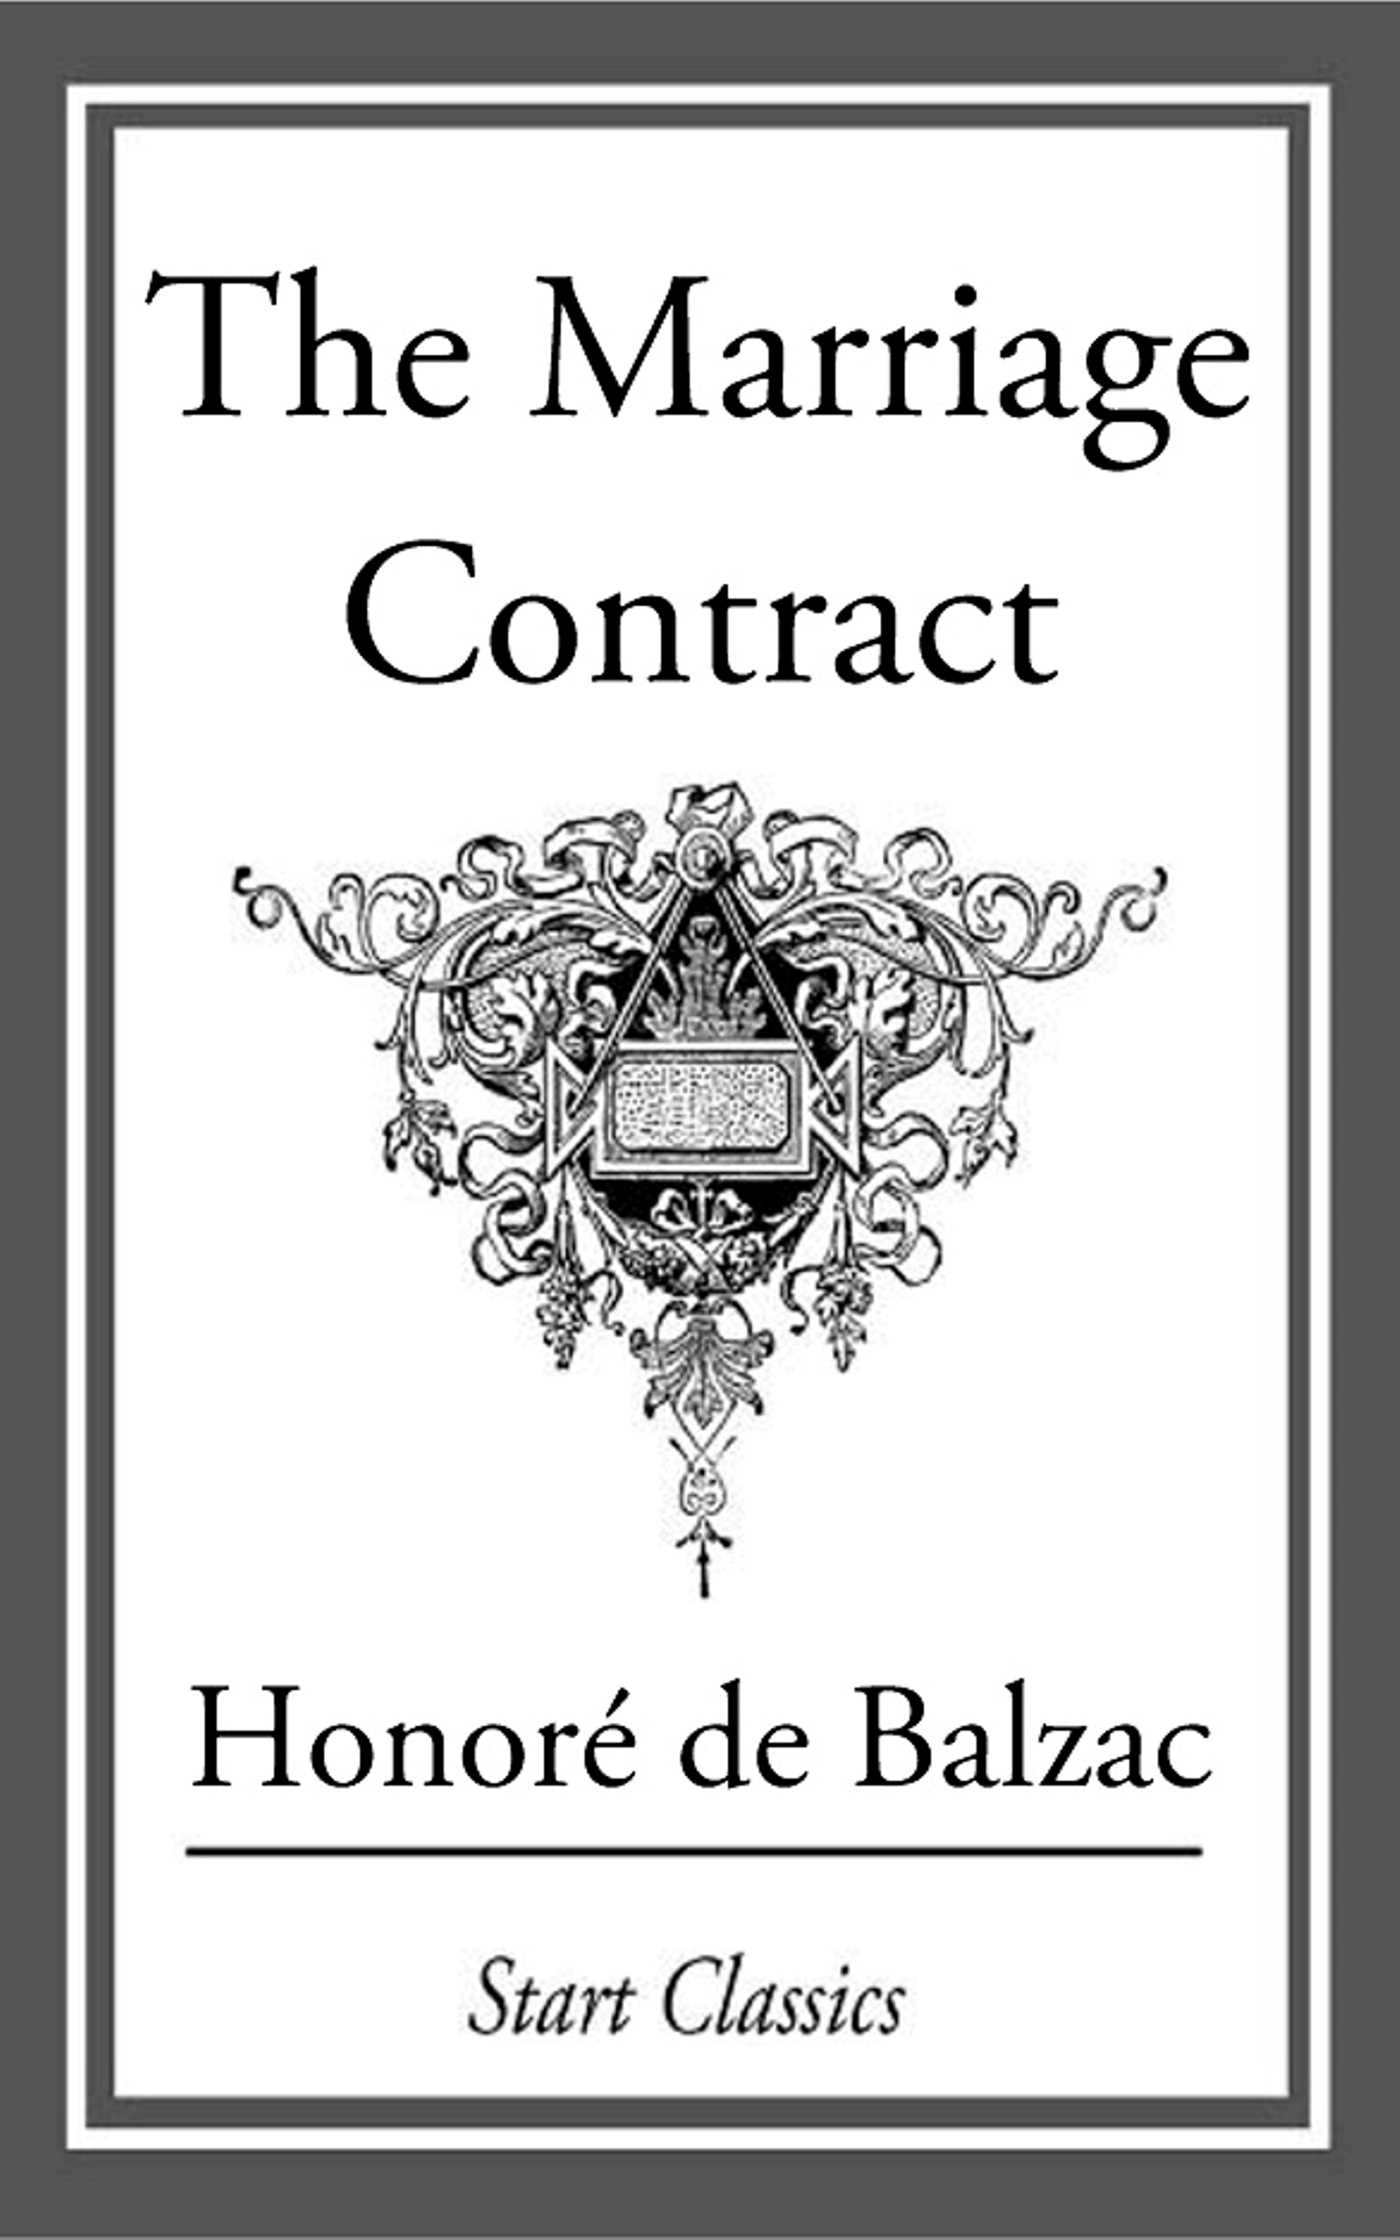 Marriage Contract